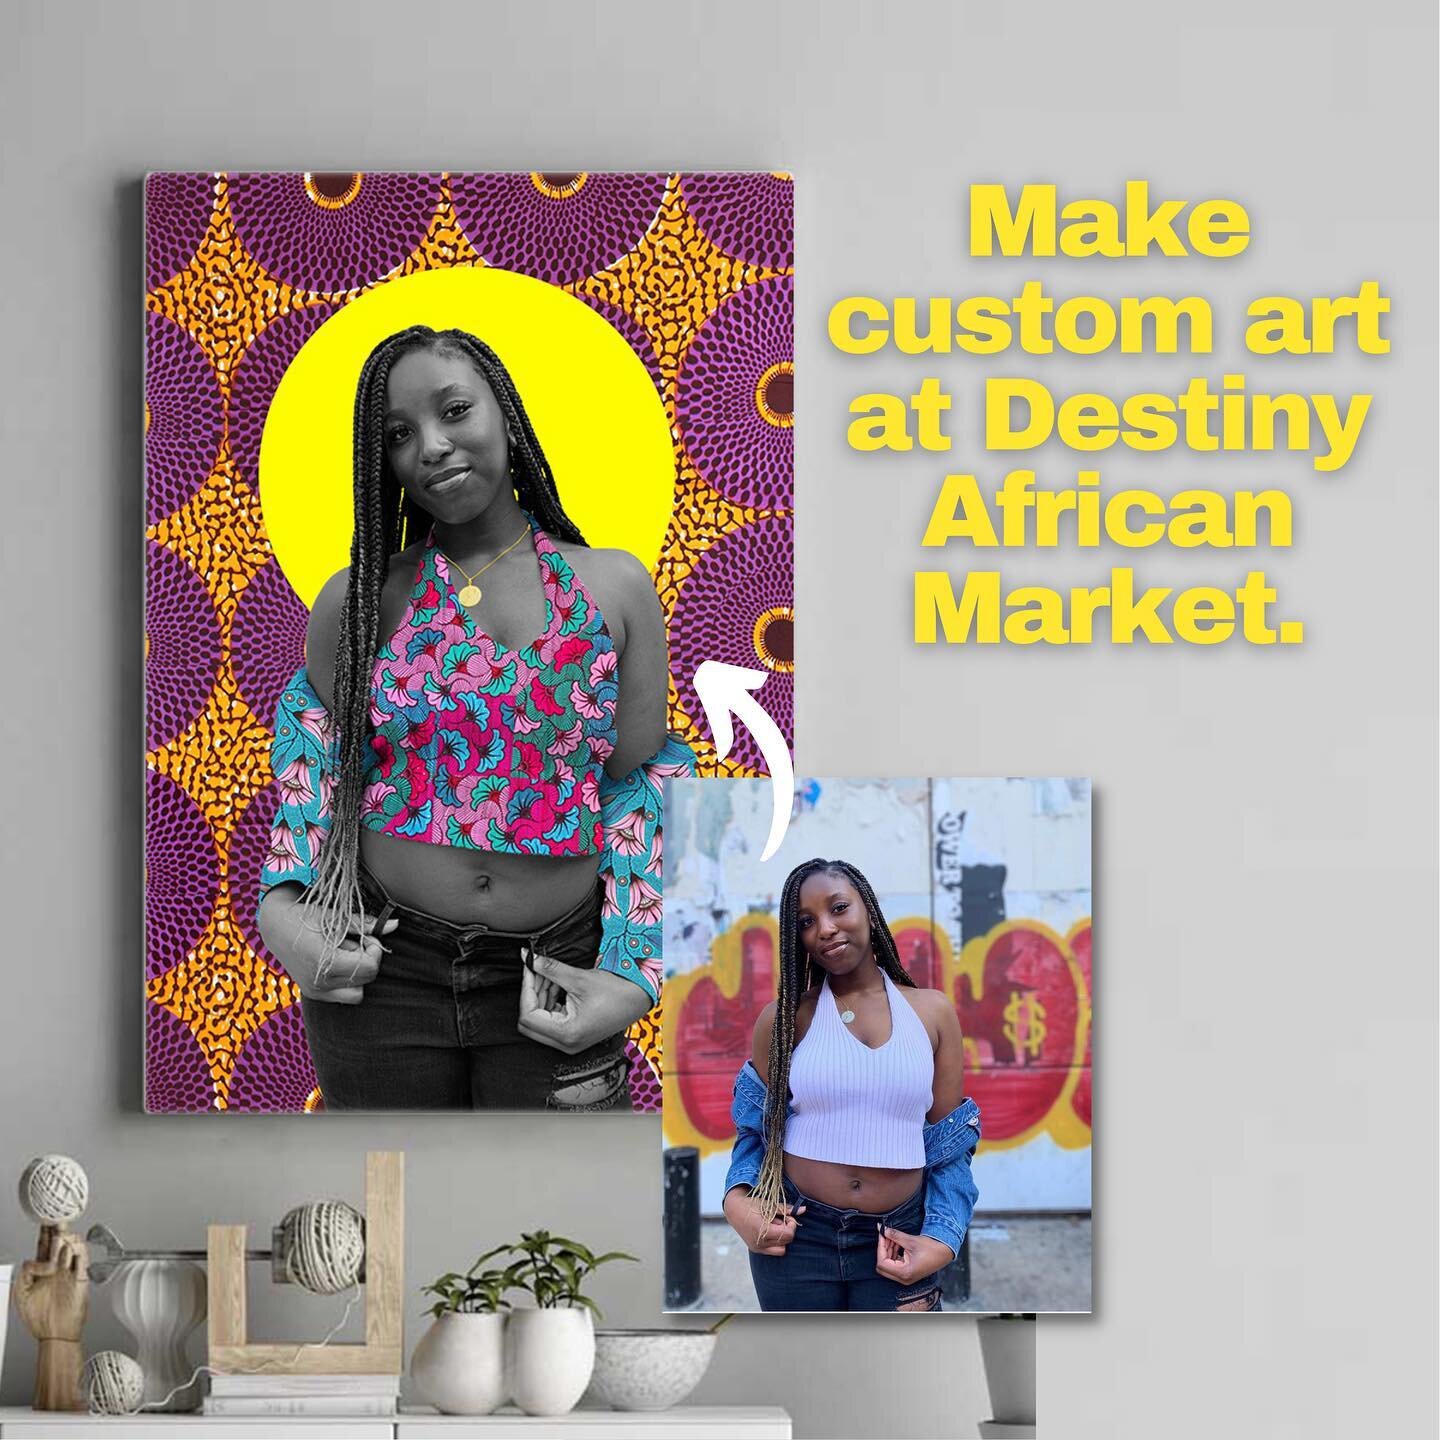 ✨🌈 Turn your photos into whimsical African print art pieces with Destiny African Market.
⠀
Perfect for home decor and as a gift for a loved one&rsquo;s special occasion ❤️&zwj;🔥 It will leave them feeling happy, confident and inspired.
⠀
DM us abou